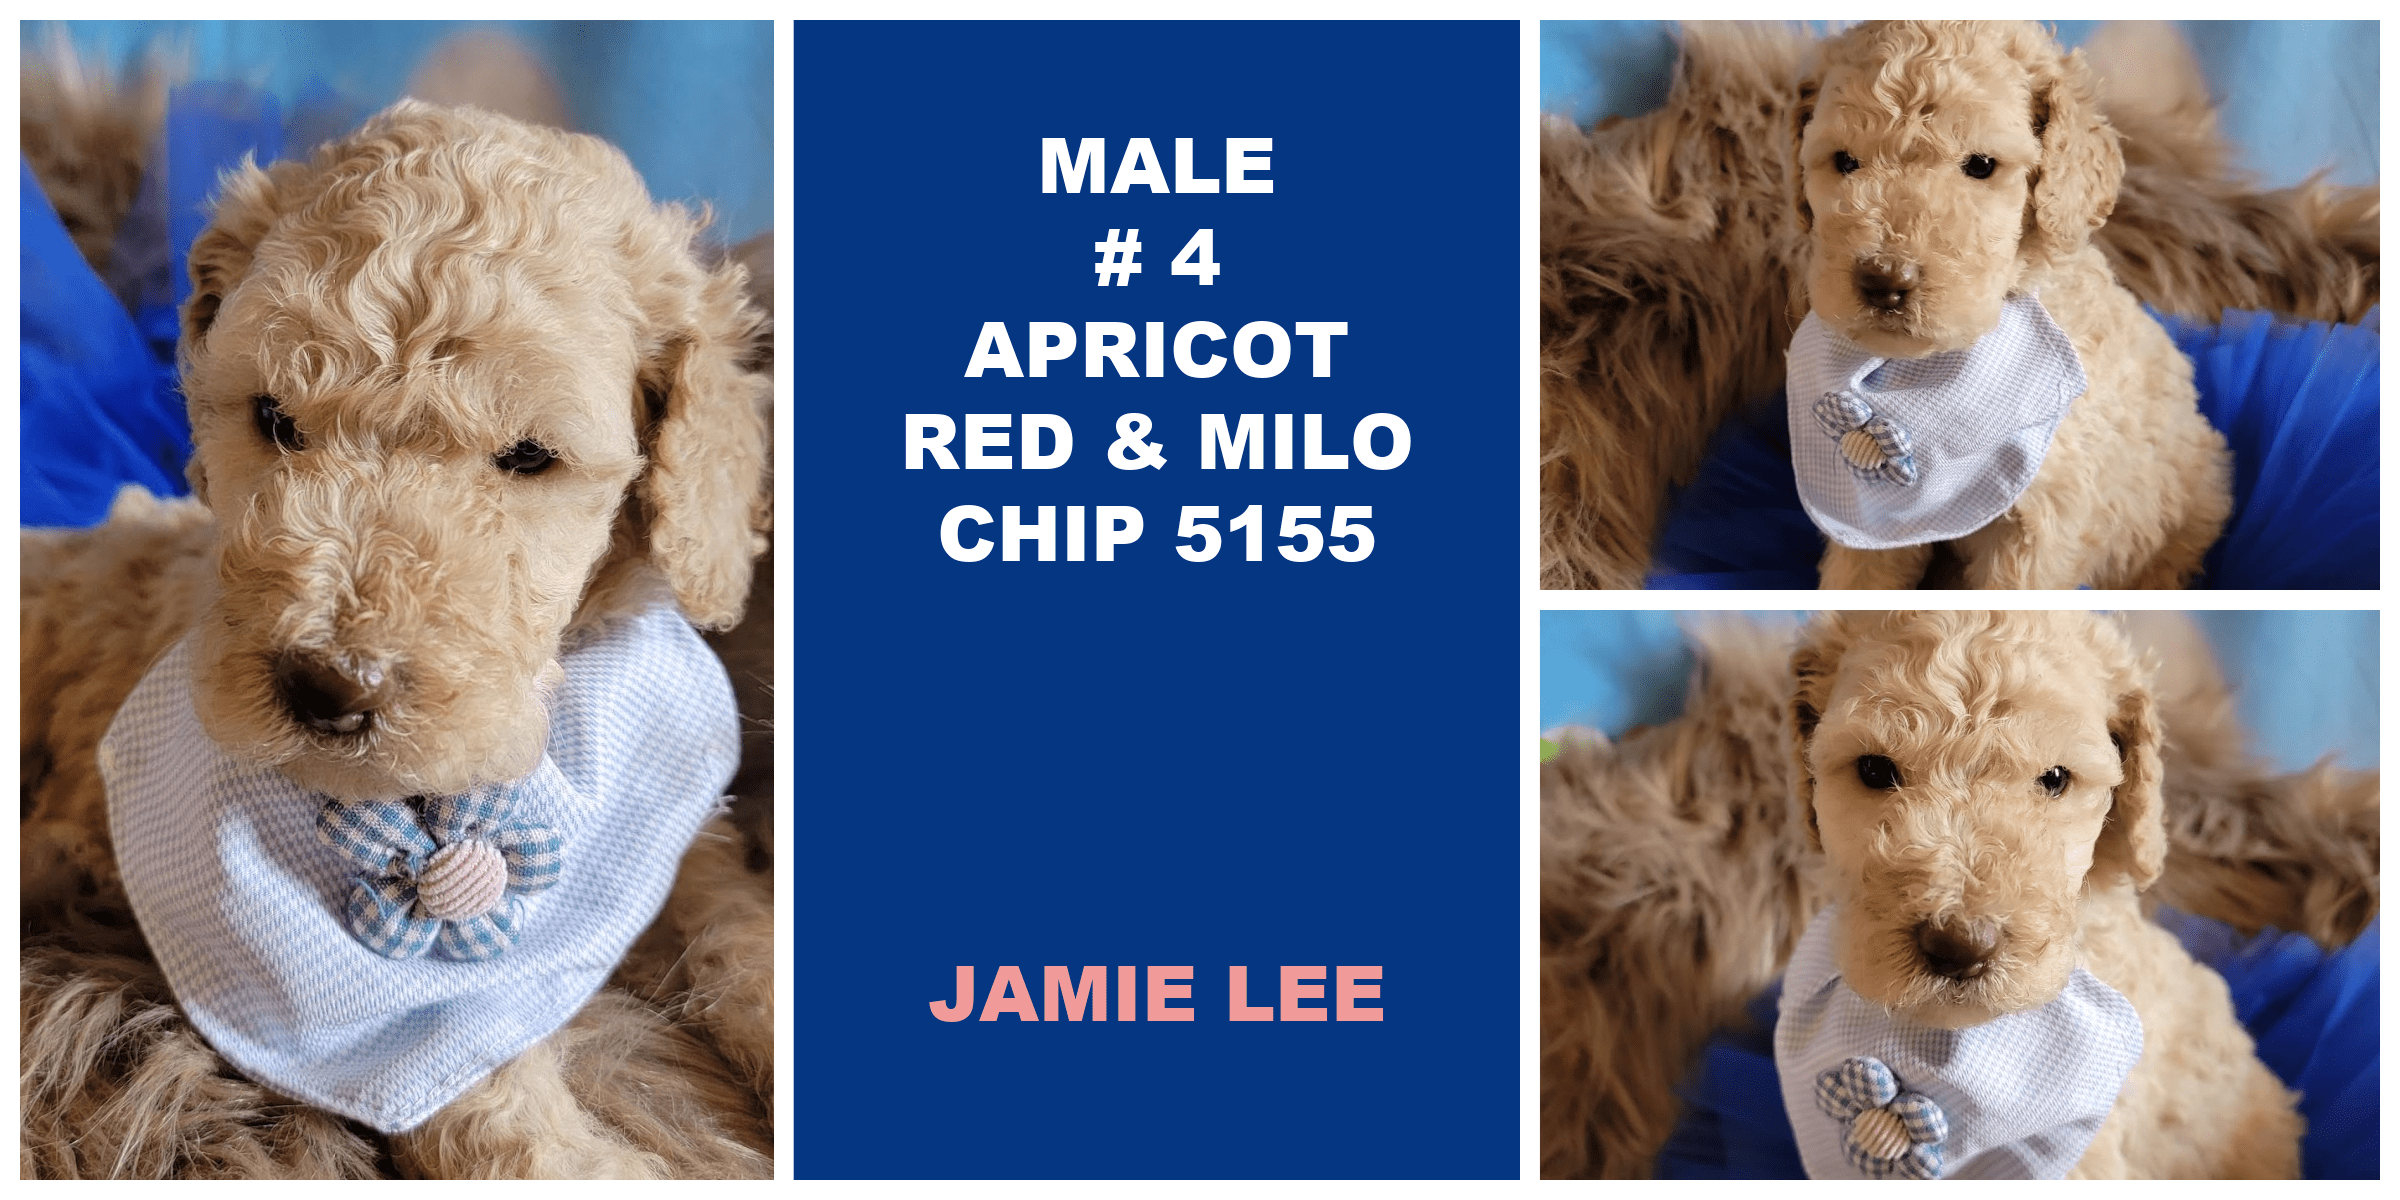 MALE 4 APRICOT RED MILO CHIP 5155 JAMIELEE